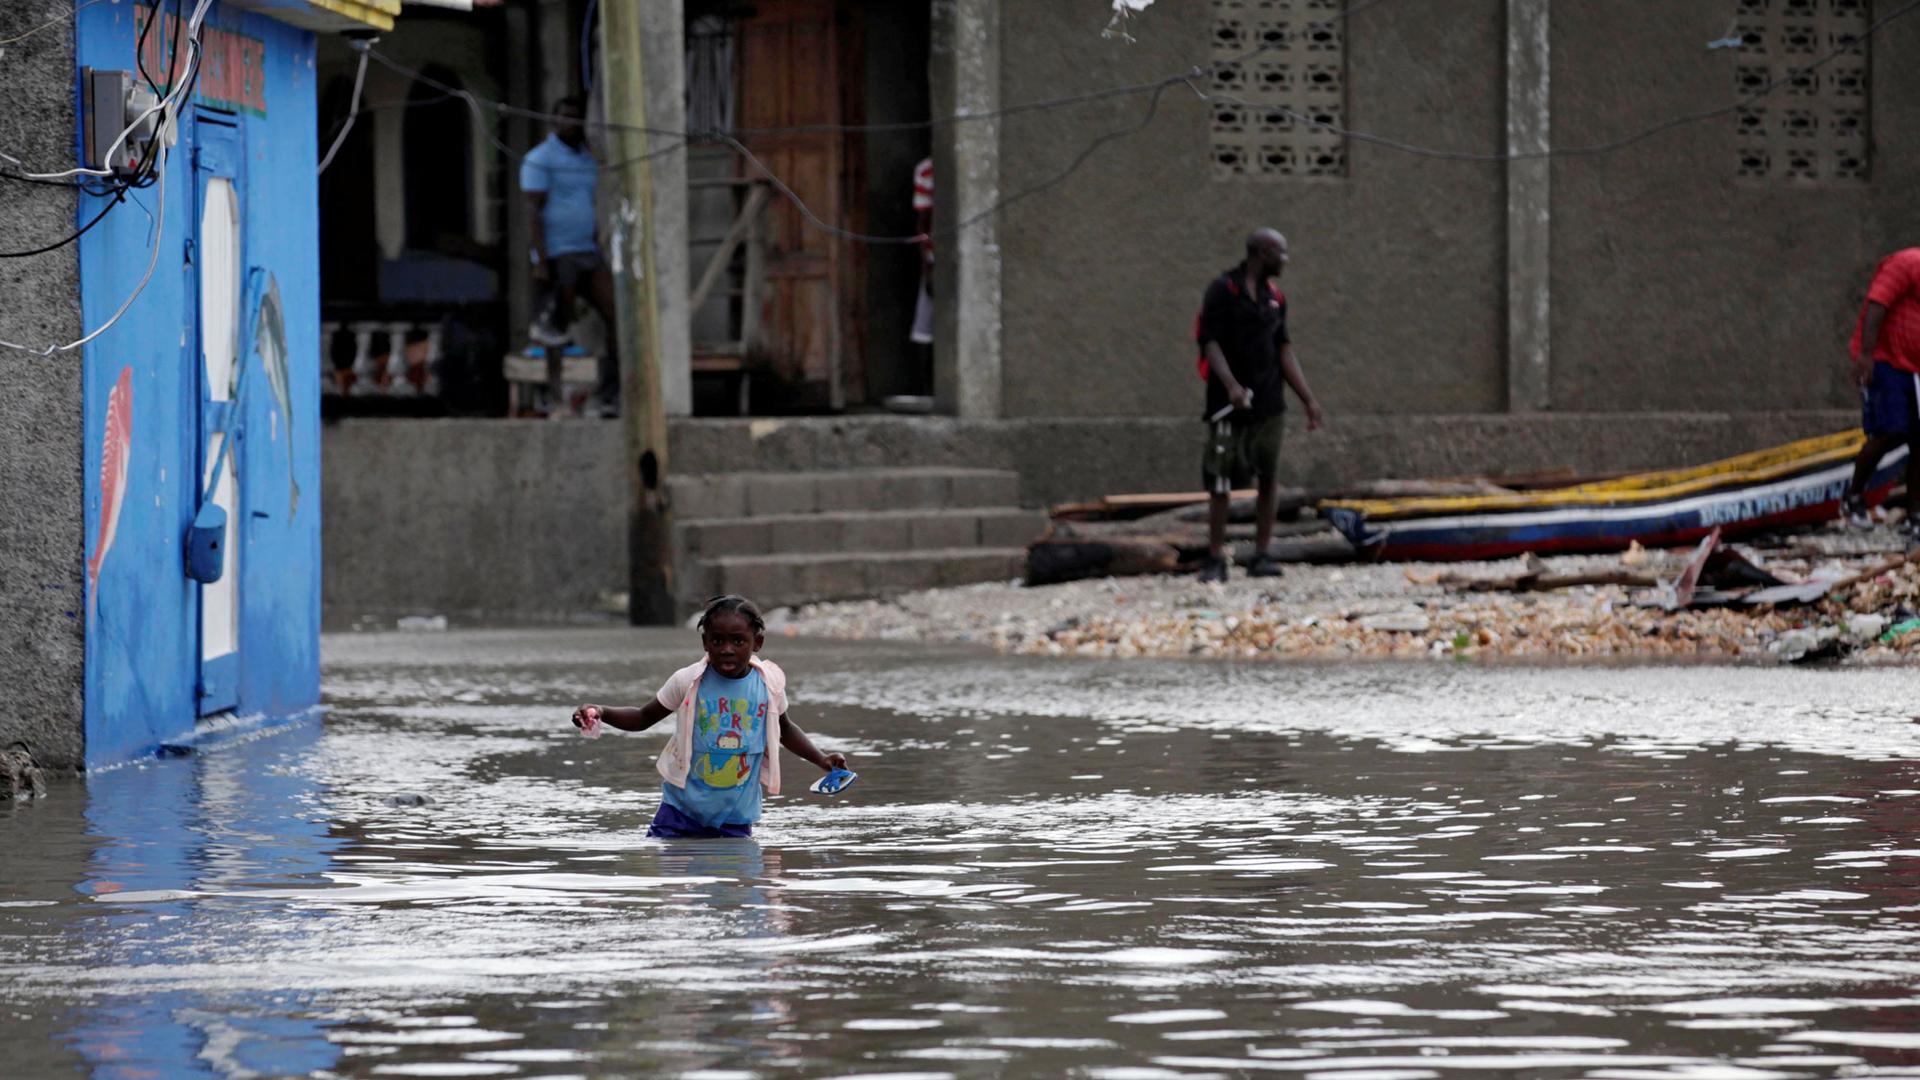 A girl trudges through a flooded area after Hurricane Matthew in Les Cayes, Haiti.